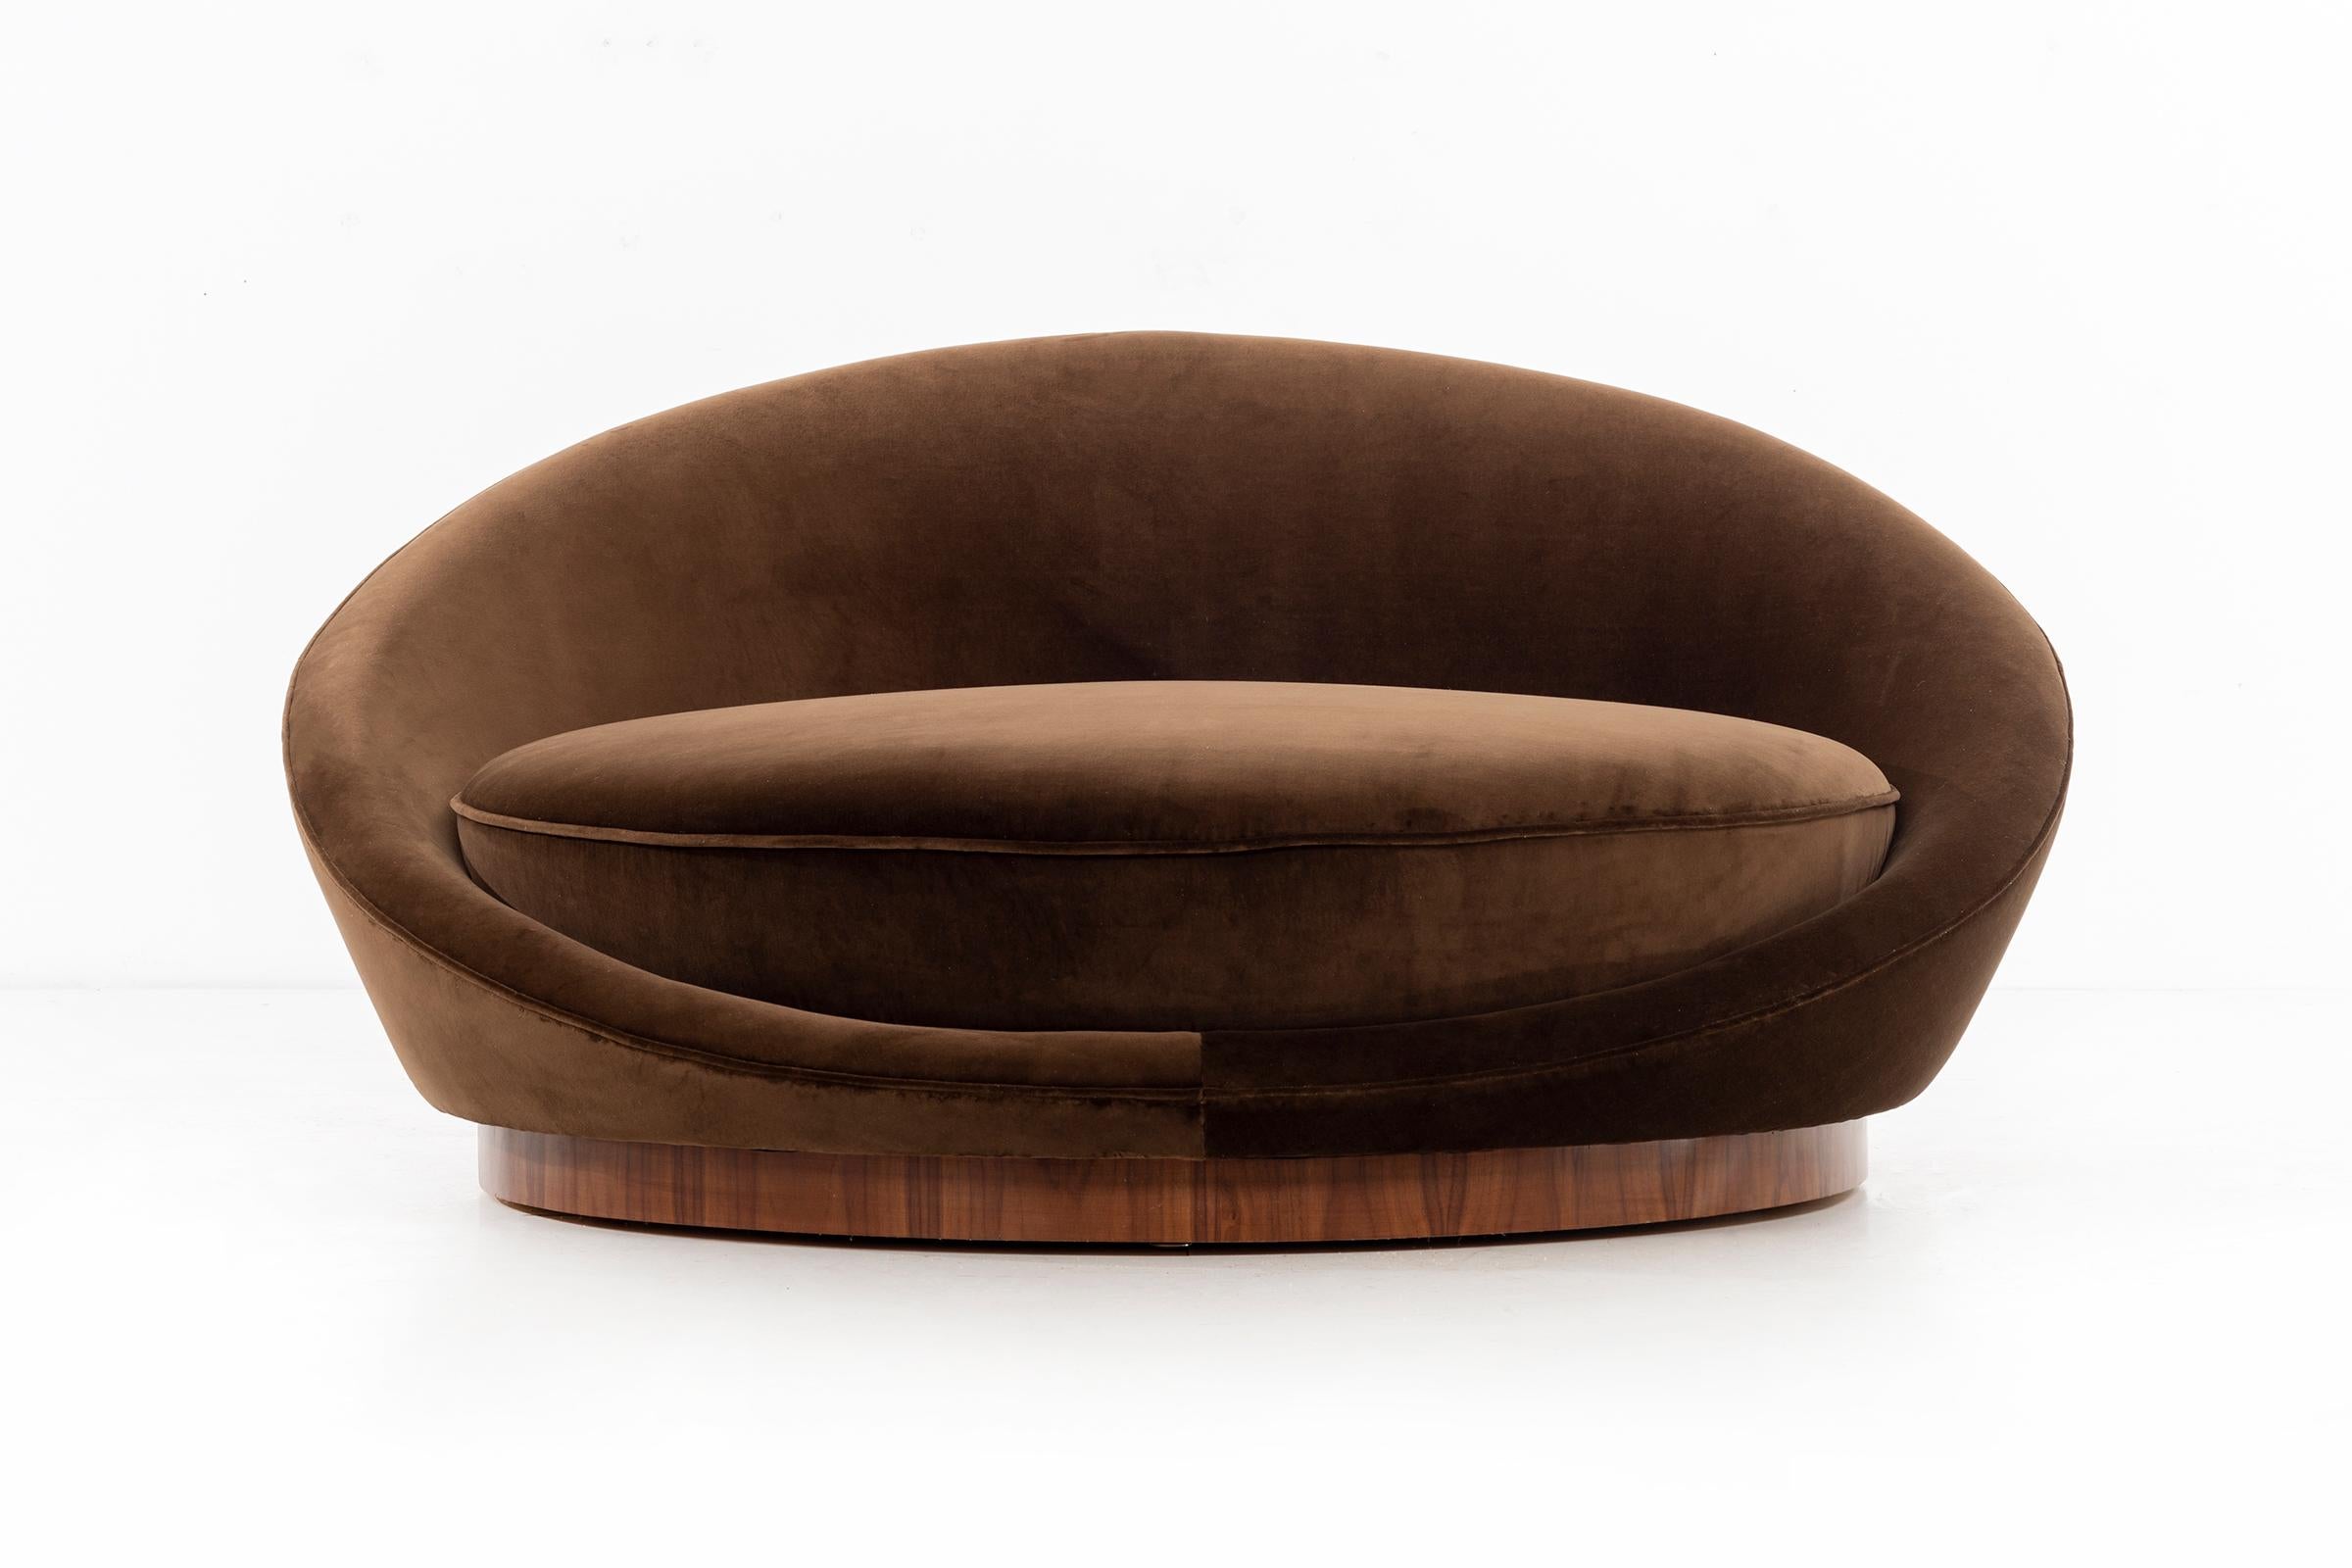 Oversized chaise lounge chair for 1-2 users. Upholstered in cotton velvet and walnut plinth base.